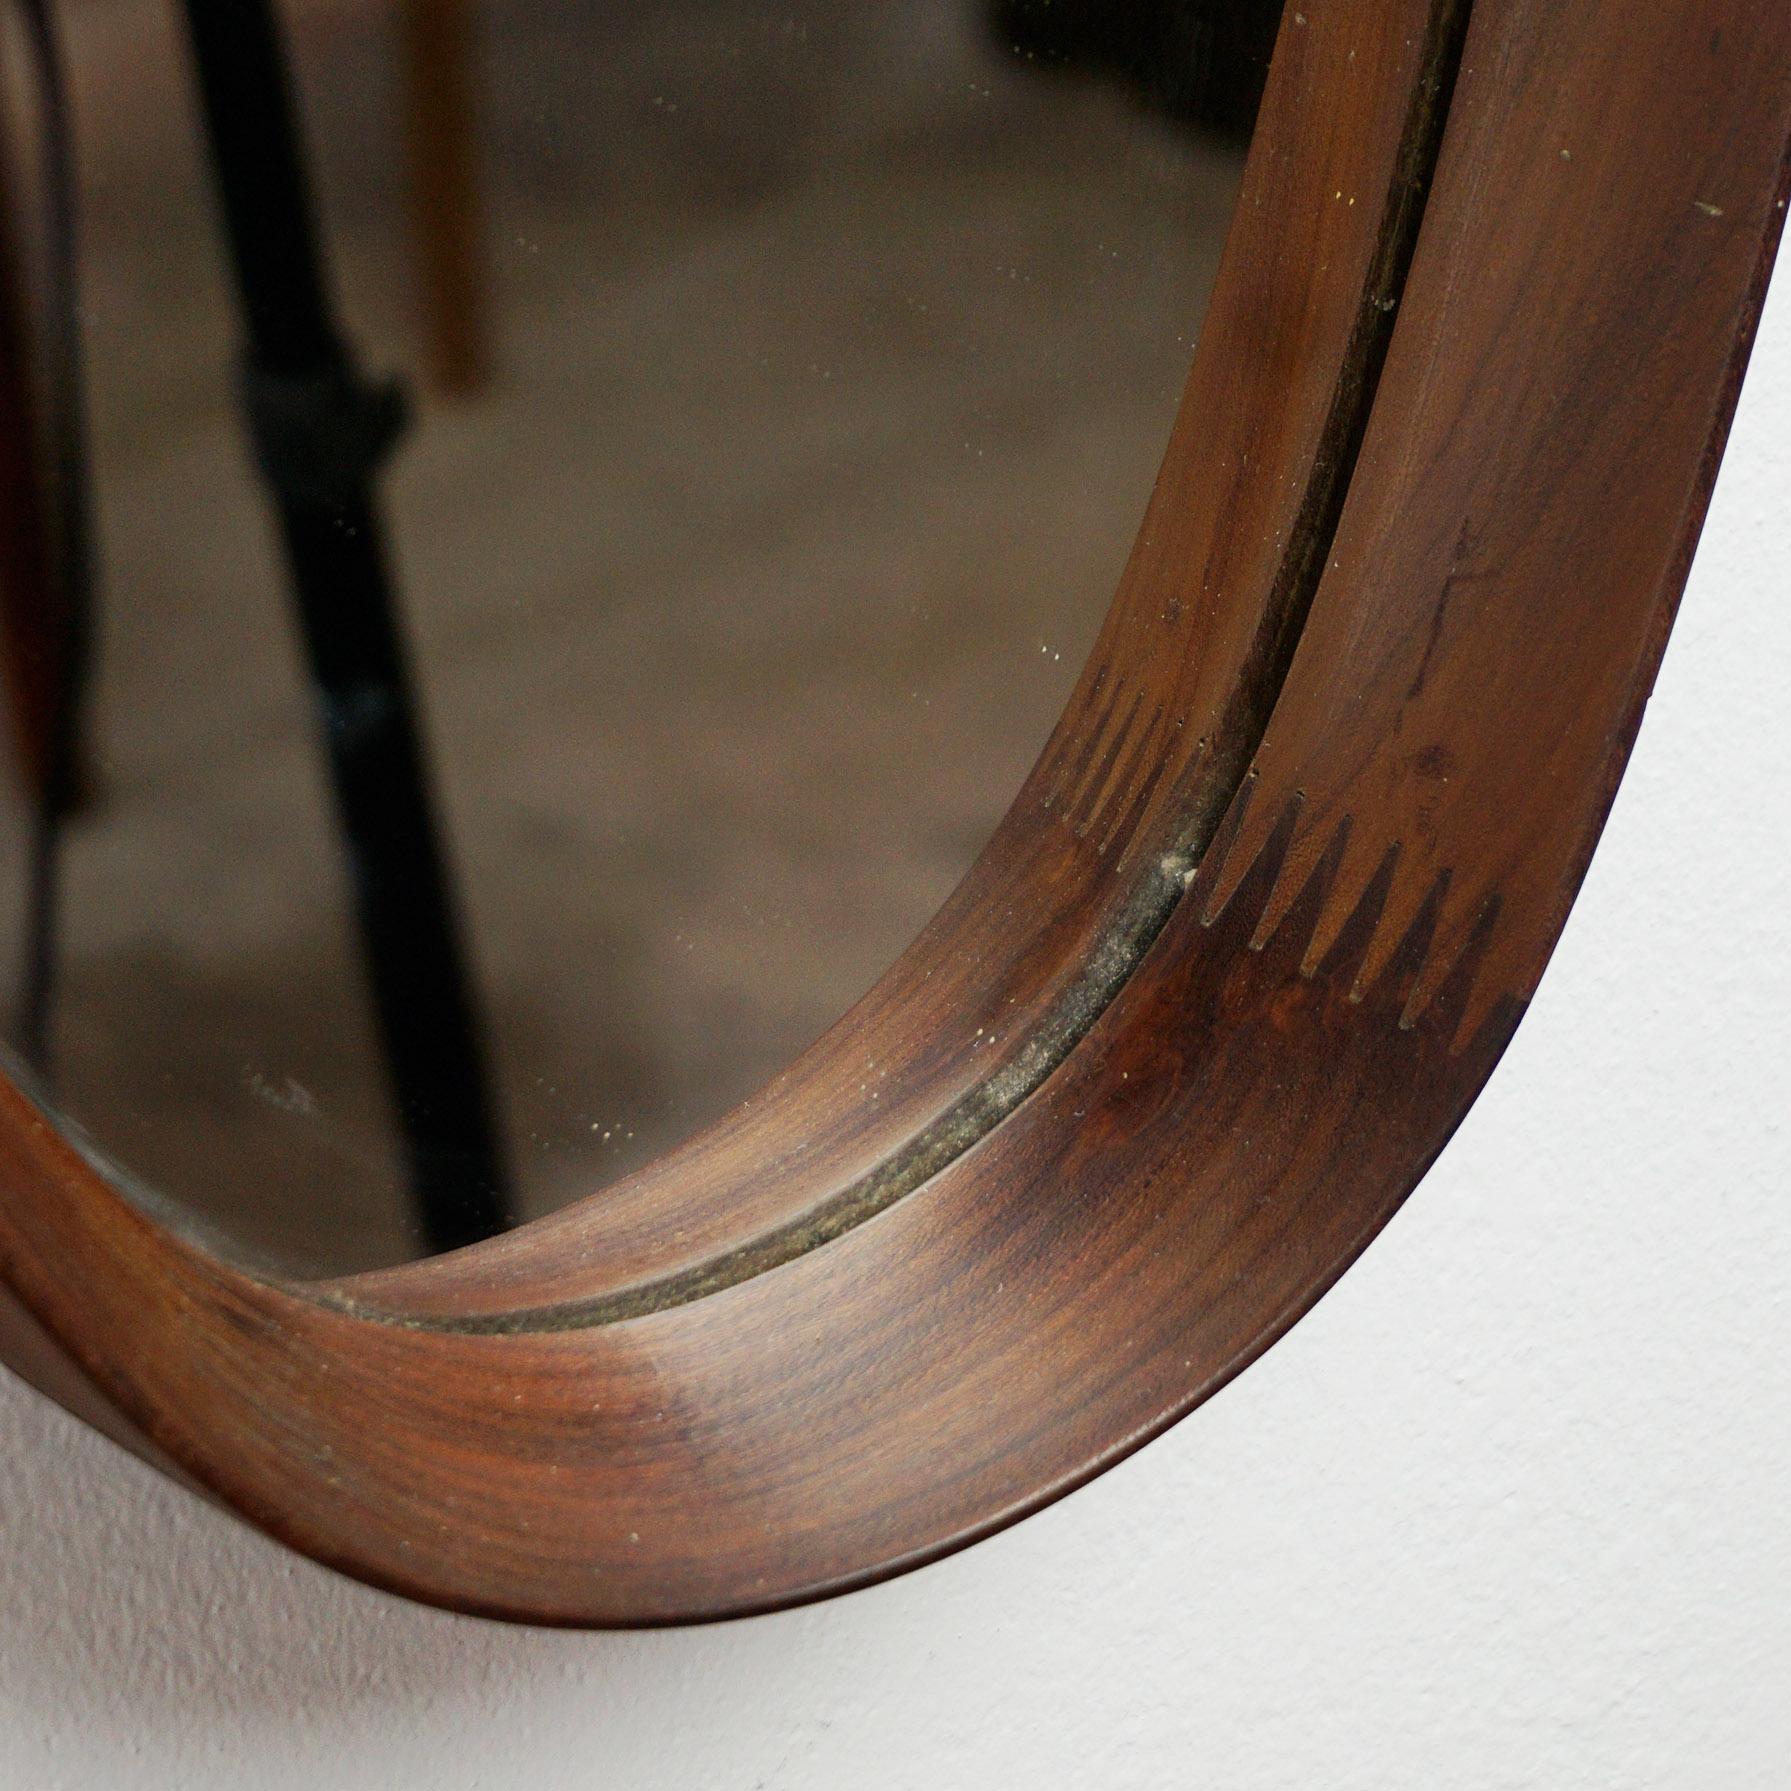 Charming Italian midcentury wooden oval mirror with cord, excellent craftsmanship.